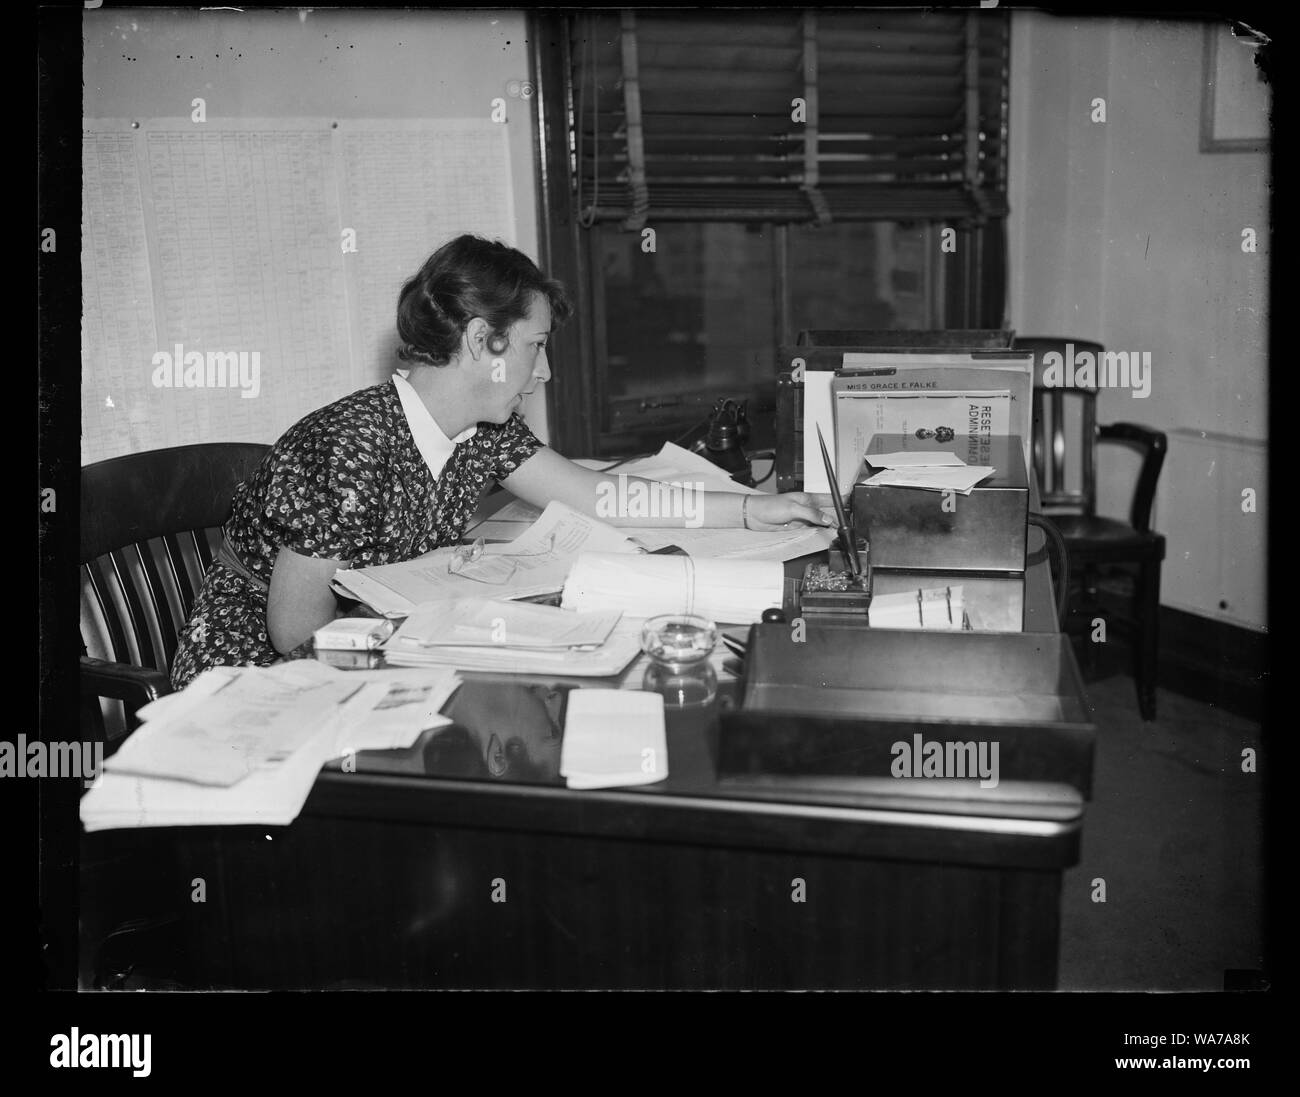 Aide to Rex Turwell, Washington, D.C. Sept. 29. An important figure in the resettlement is Miss Grace E. Falke, Executive Assistant to the Administrator Rex Tugwell. It was Miss Falke who had the final say on the interior furnishins for Greenbelt, the Resettlement Administration's planned city at Berwyn Heights, Md., which has just been completed Stock Photo